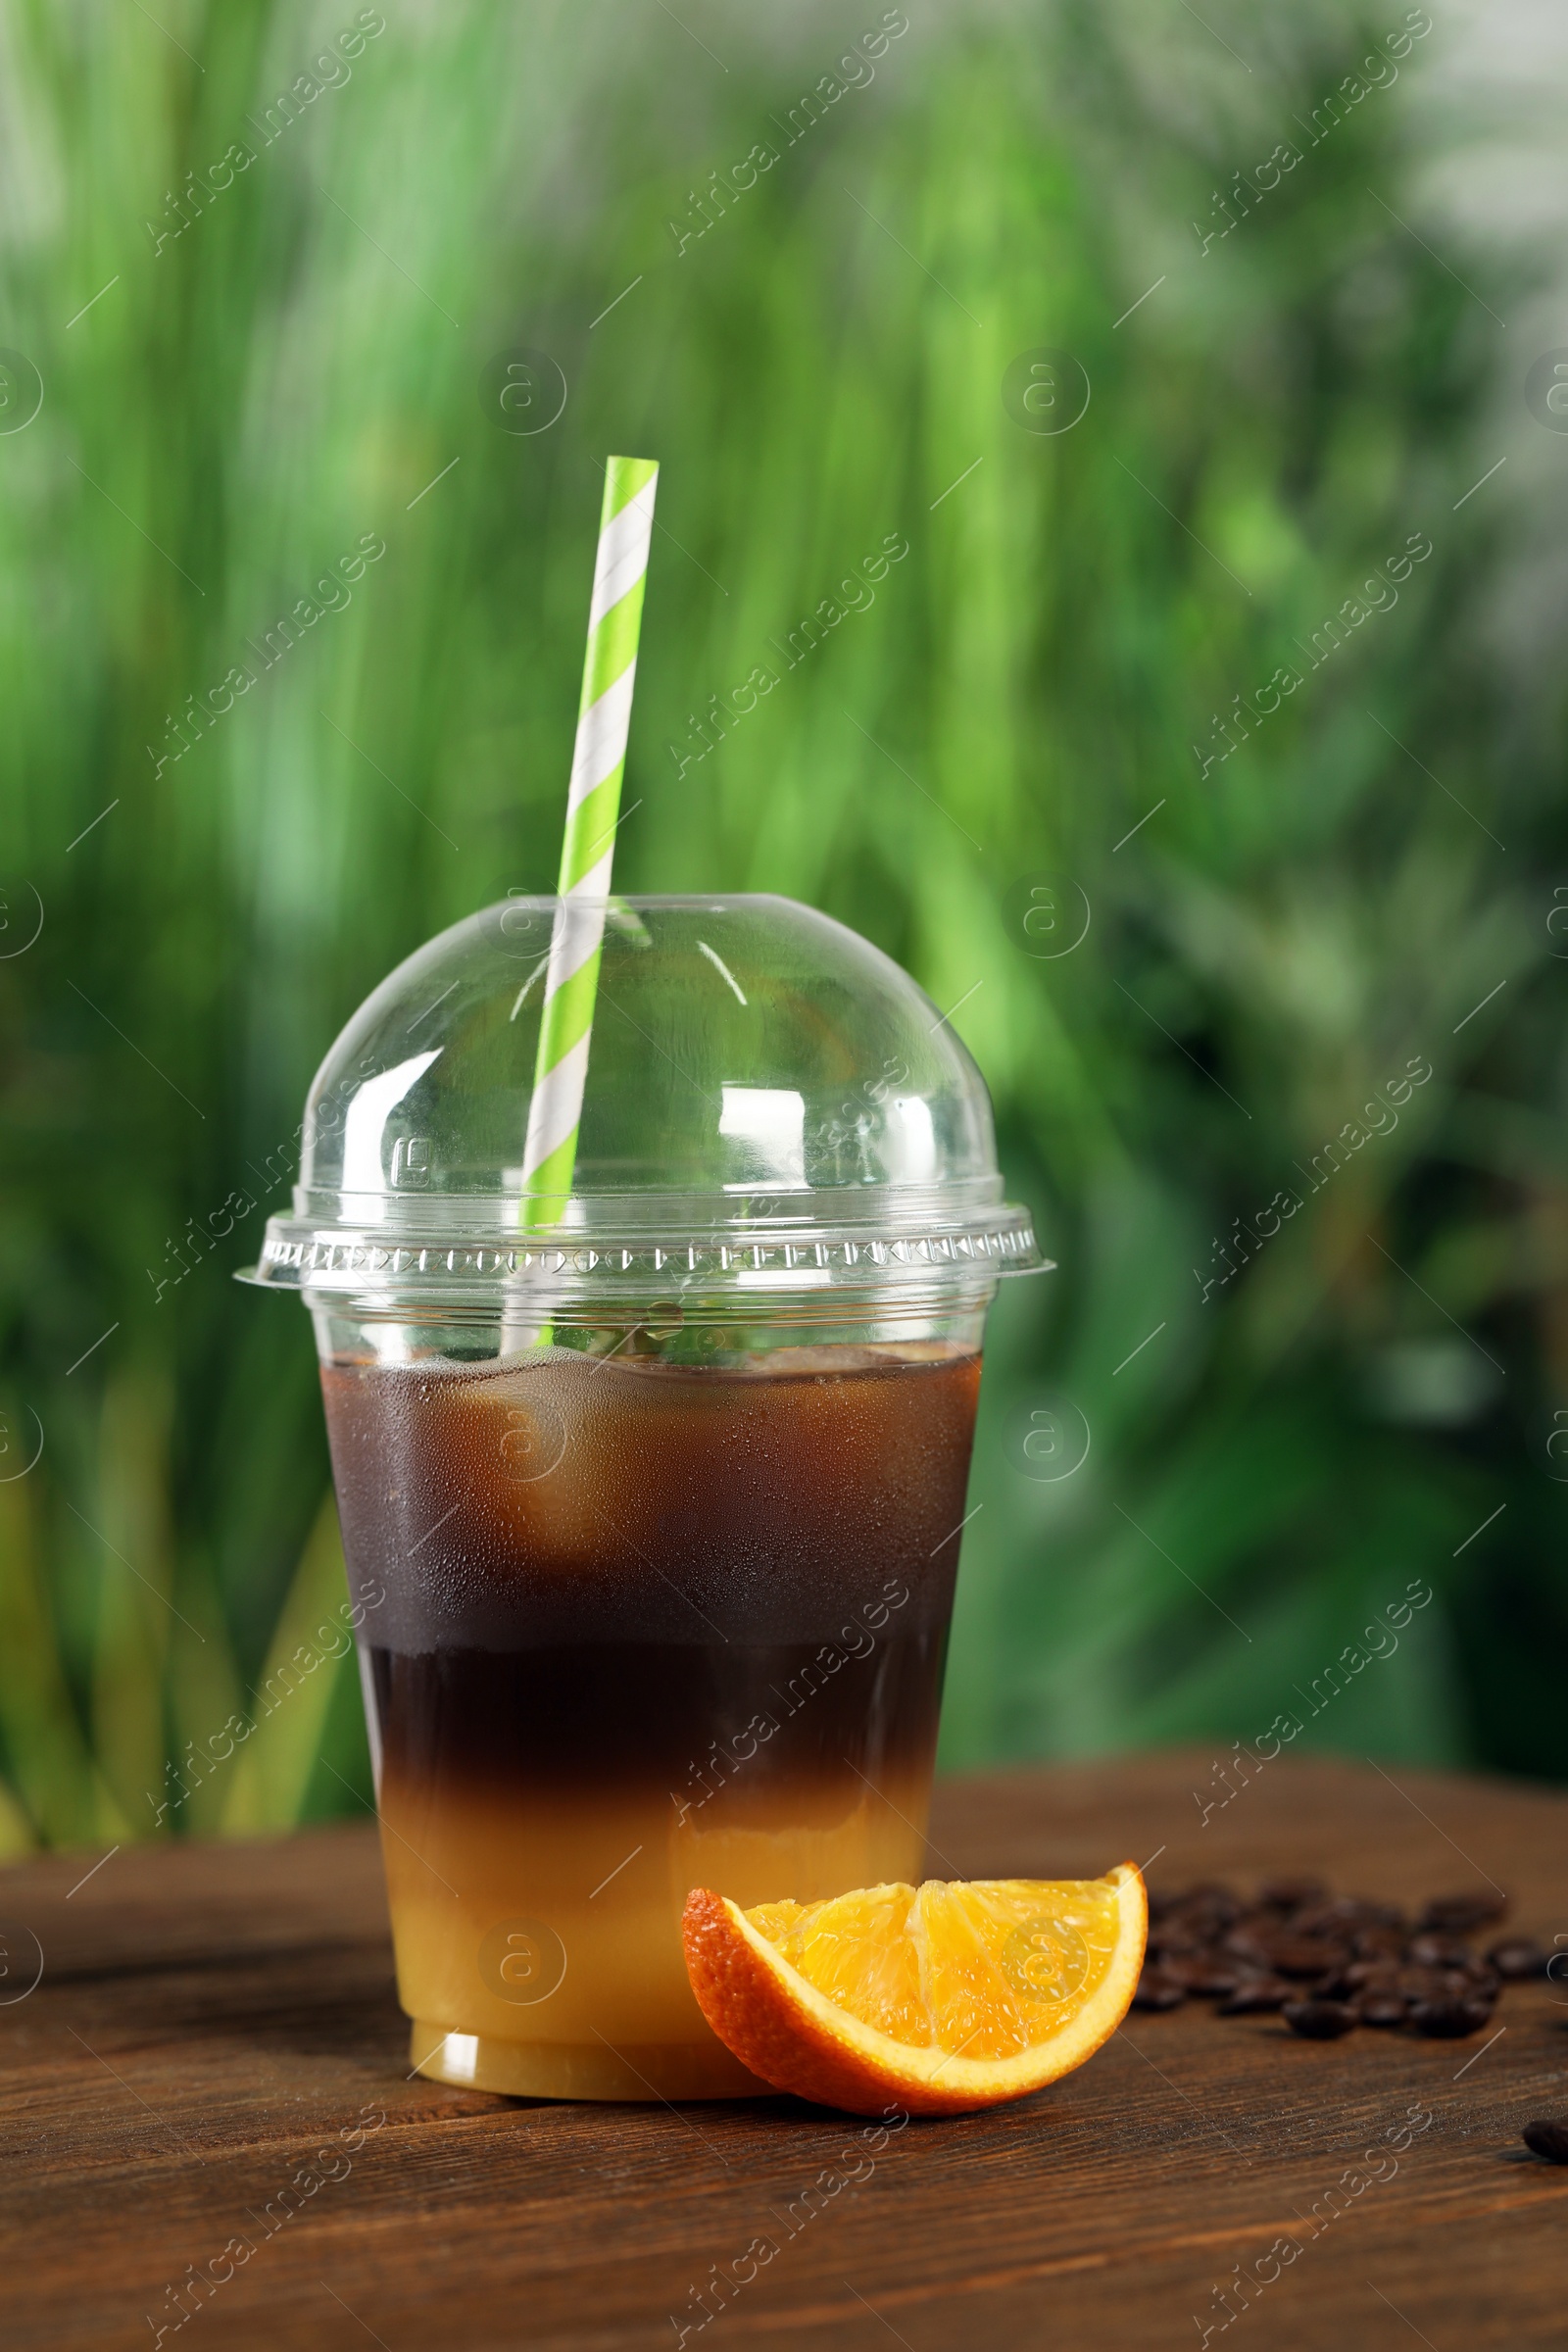 Photo of Tasty refreshing drink with coffee and orange juice in plastic cup on wooden table against blurred background